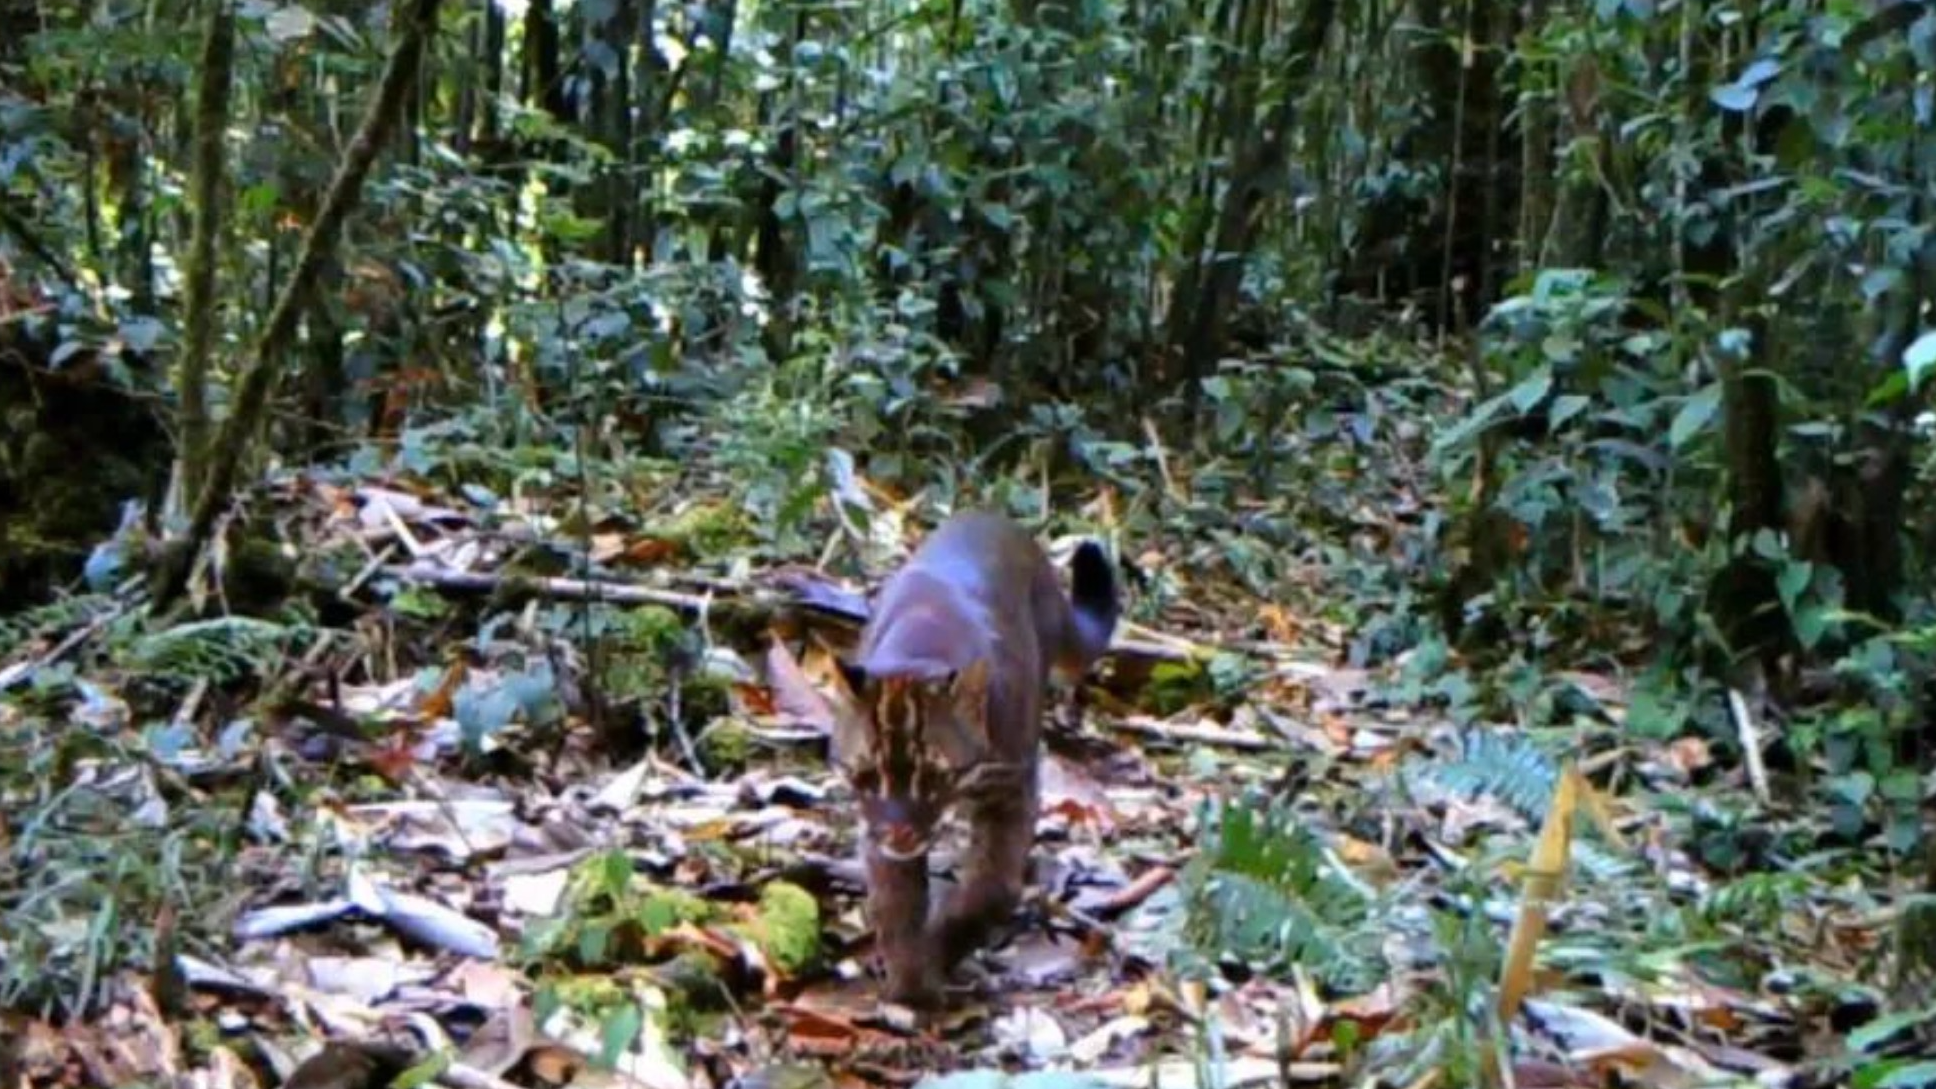 This undated file photo shows an Asian golden cat wandering in the forest. /Shan Shui Conservation Center